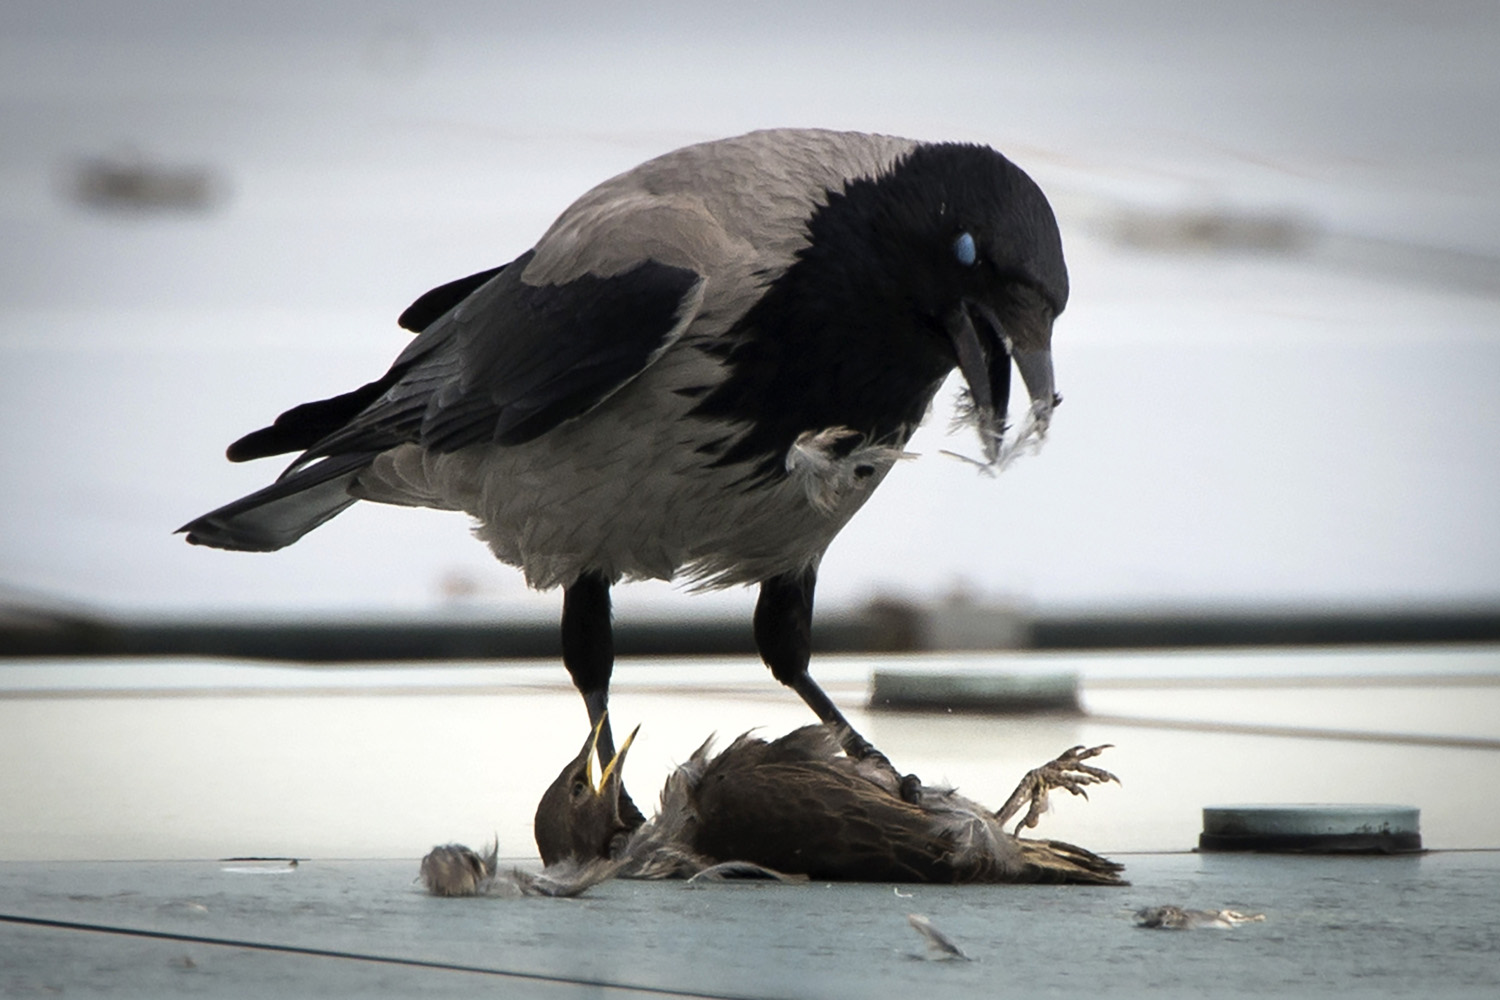 A crow eats its prey sitting on the roof of the Chancellery in Berlin on May 6, 2014.